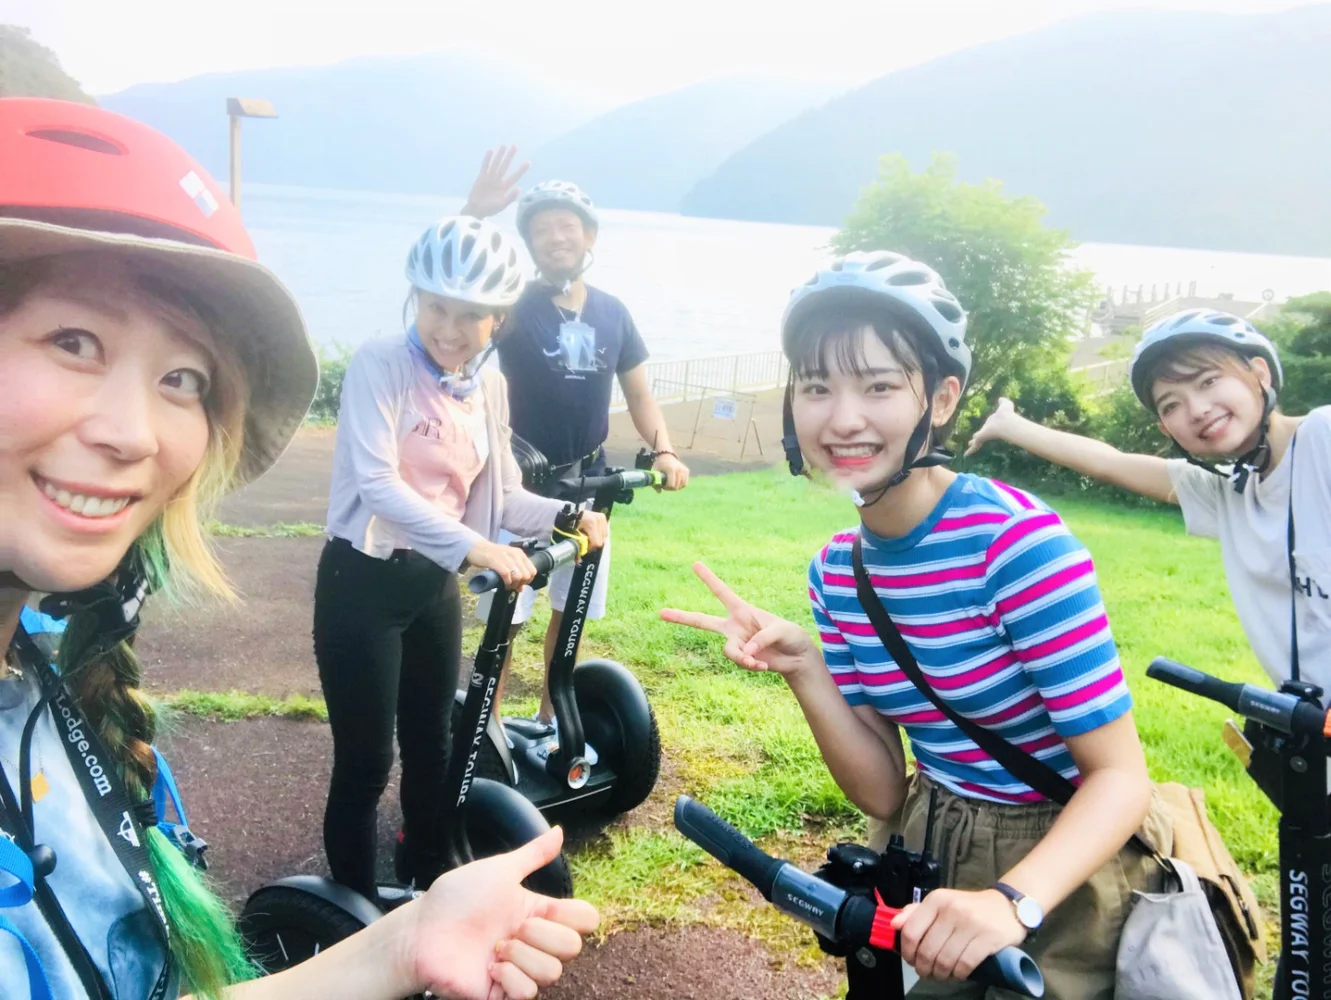 It is a Segway tour that goes around the lake with rich nature while looking at the scenic Hakone Lake Ashino